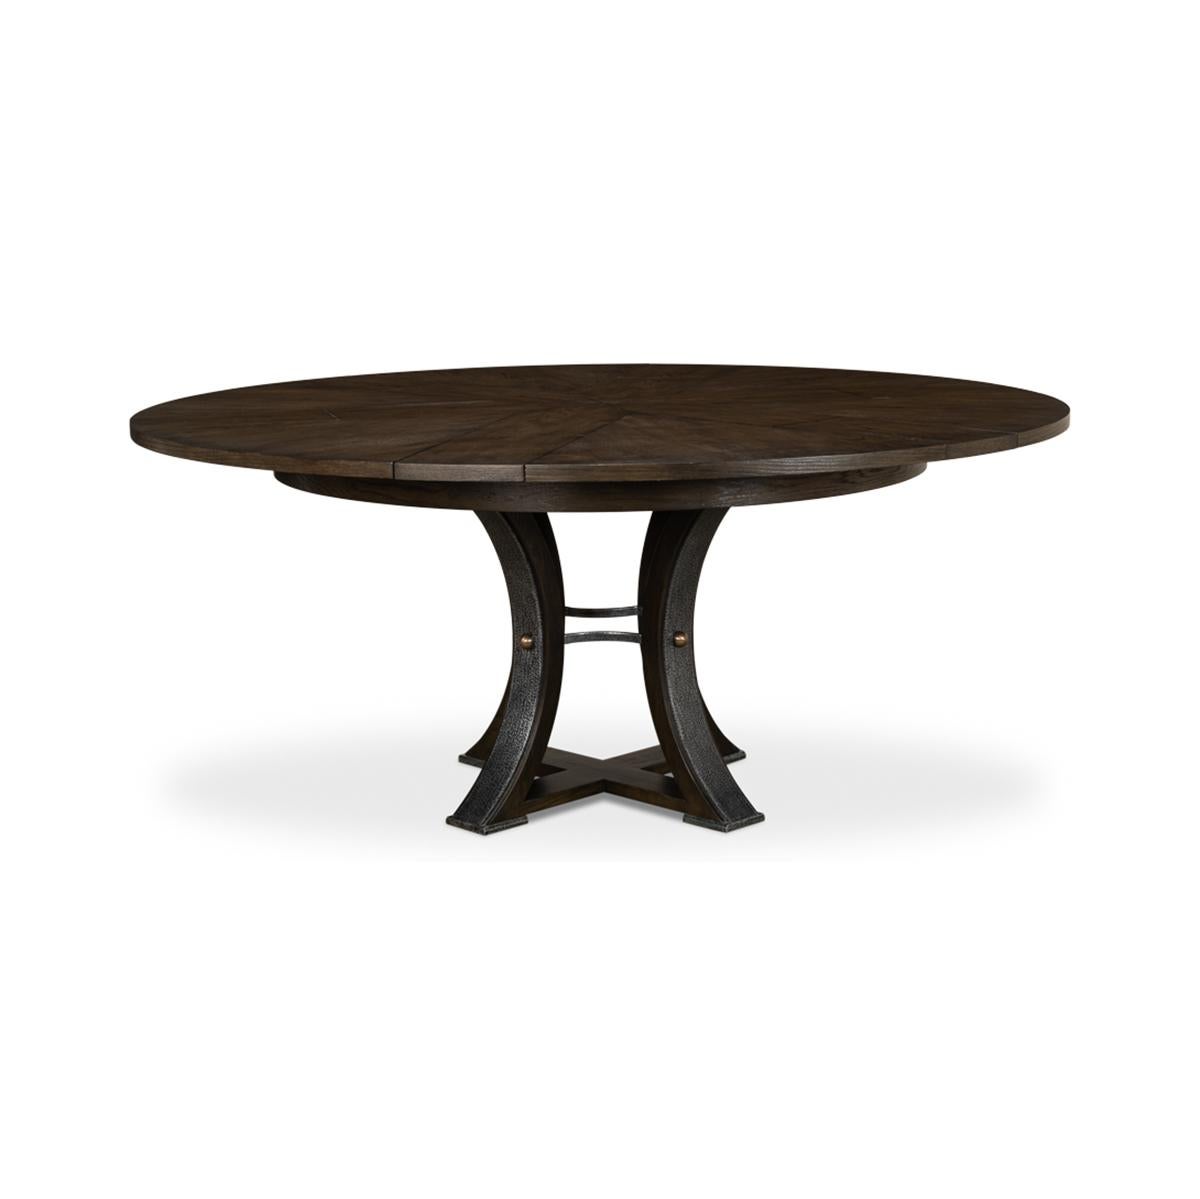 Contemporary Modern Industrial Dining Table - 70